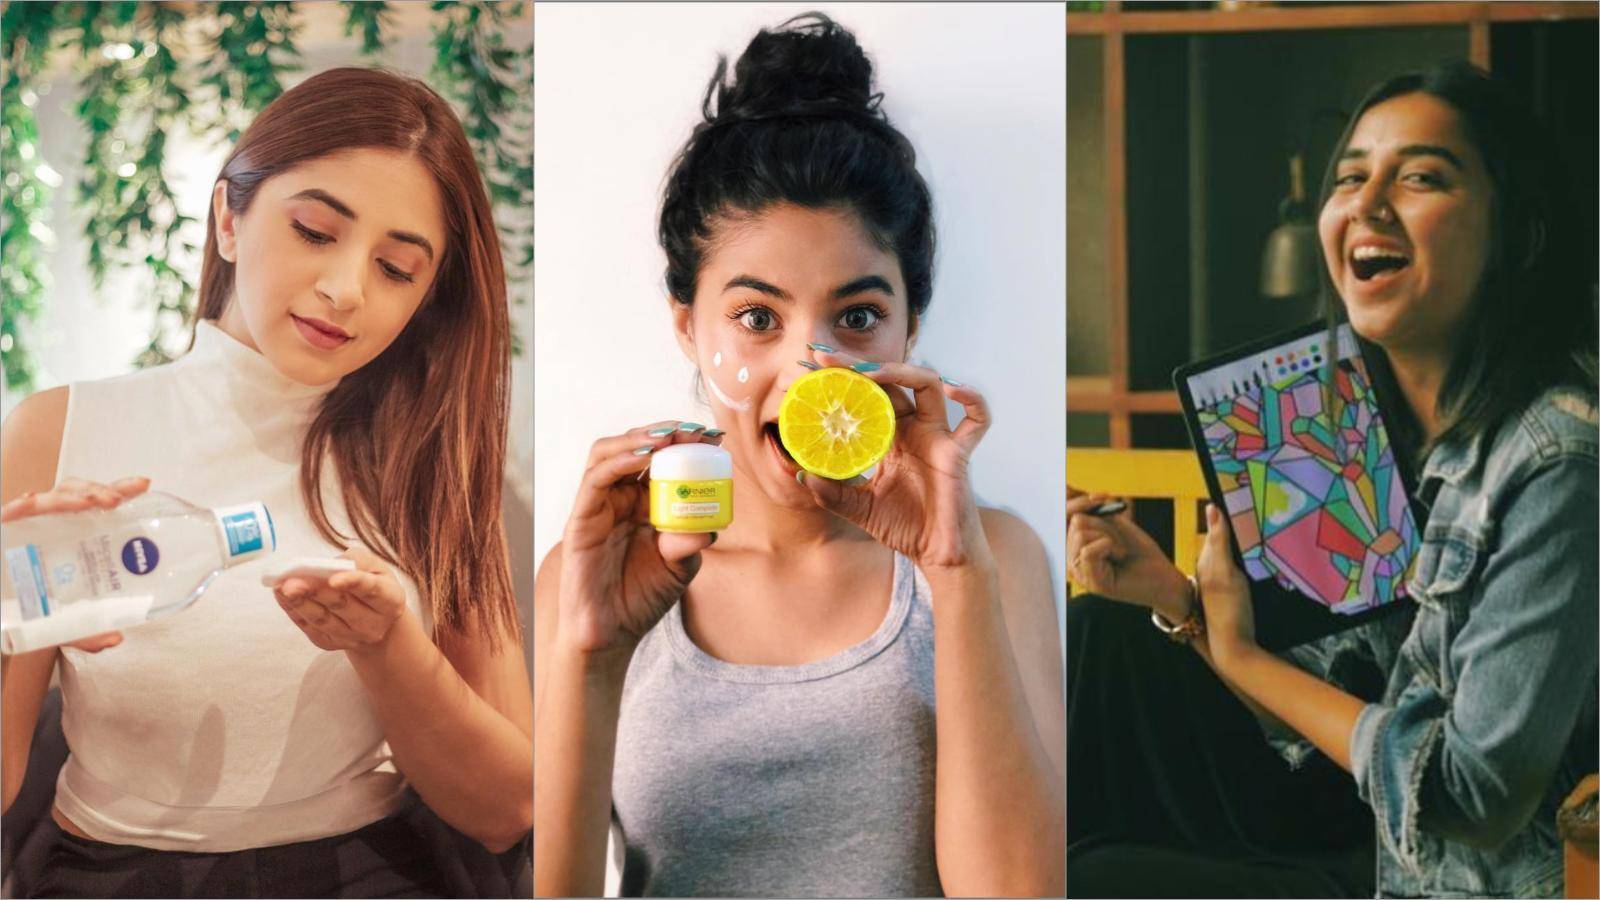 The Essential Guide to Becoming an Instagram Influencer